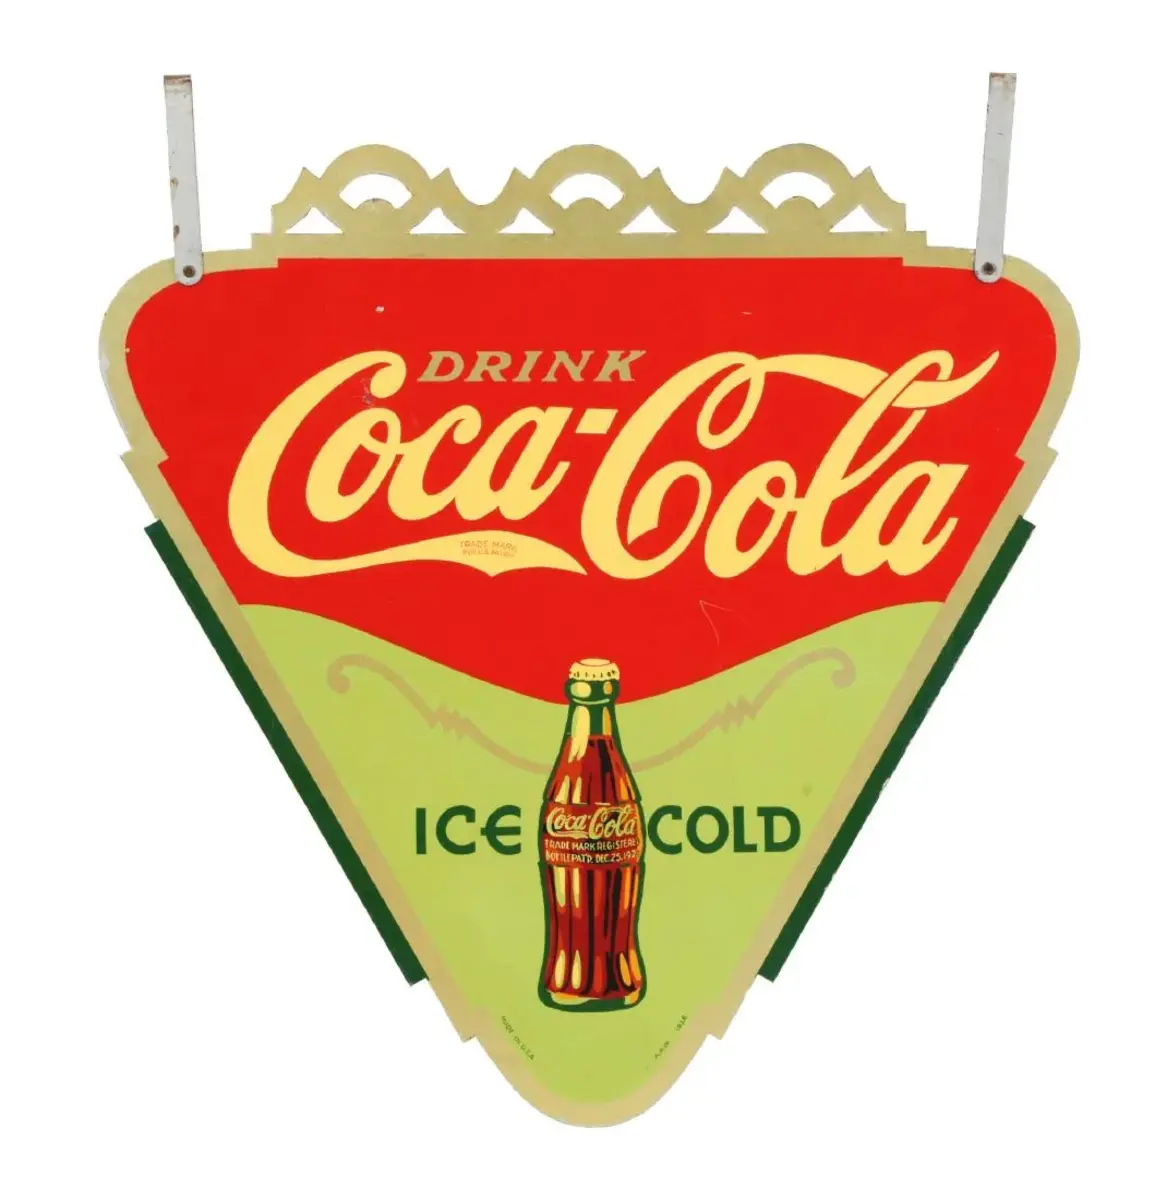 Triangle Coca-Cola sign, 1936, sold through Morphy Auctions, $3,000 May 15, 2018. Courtesy of Morphy Auctions.